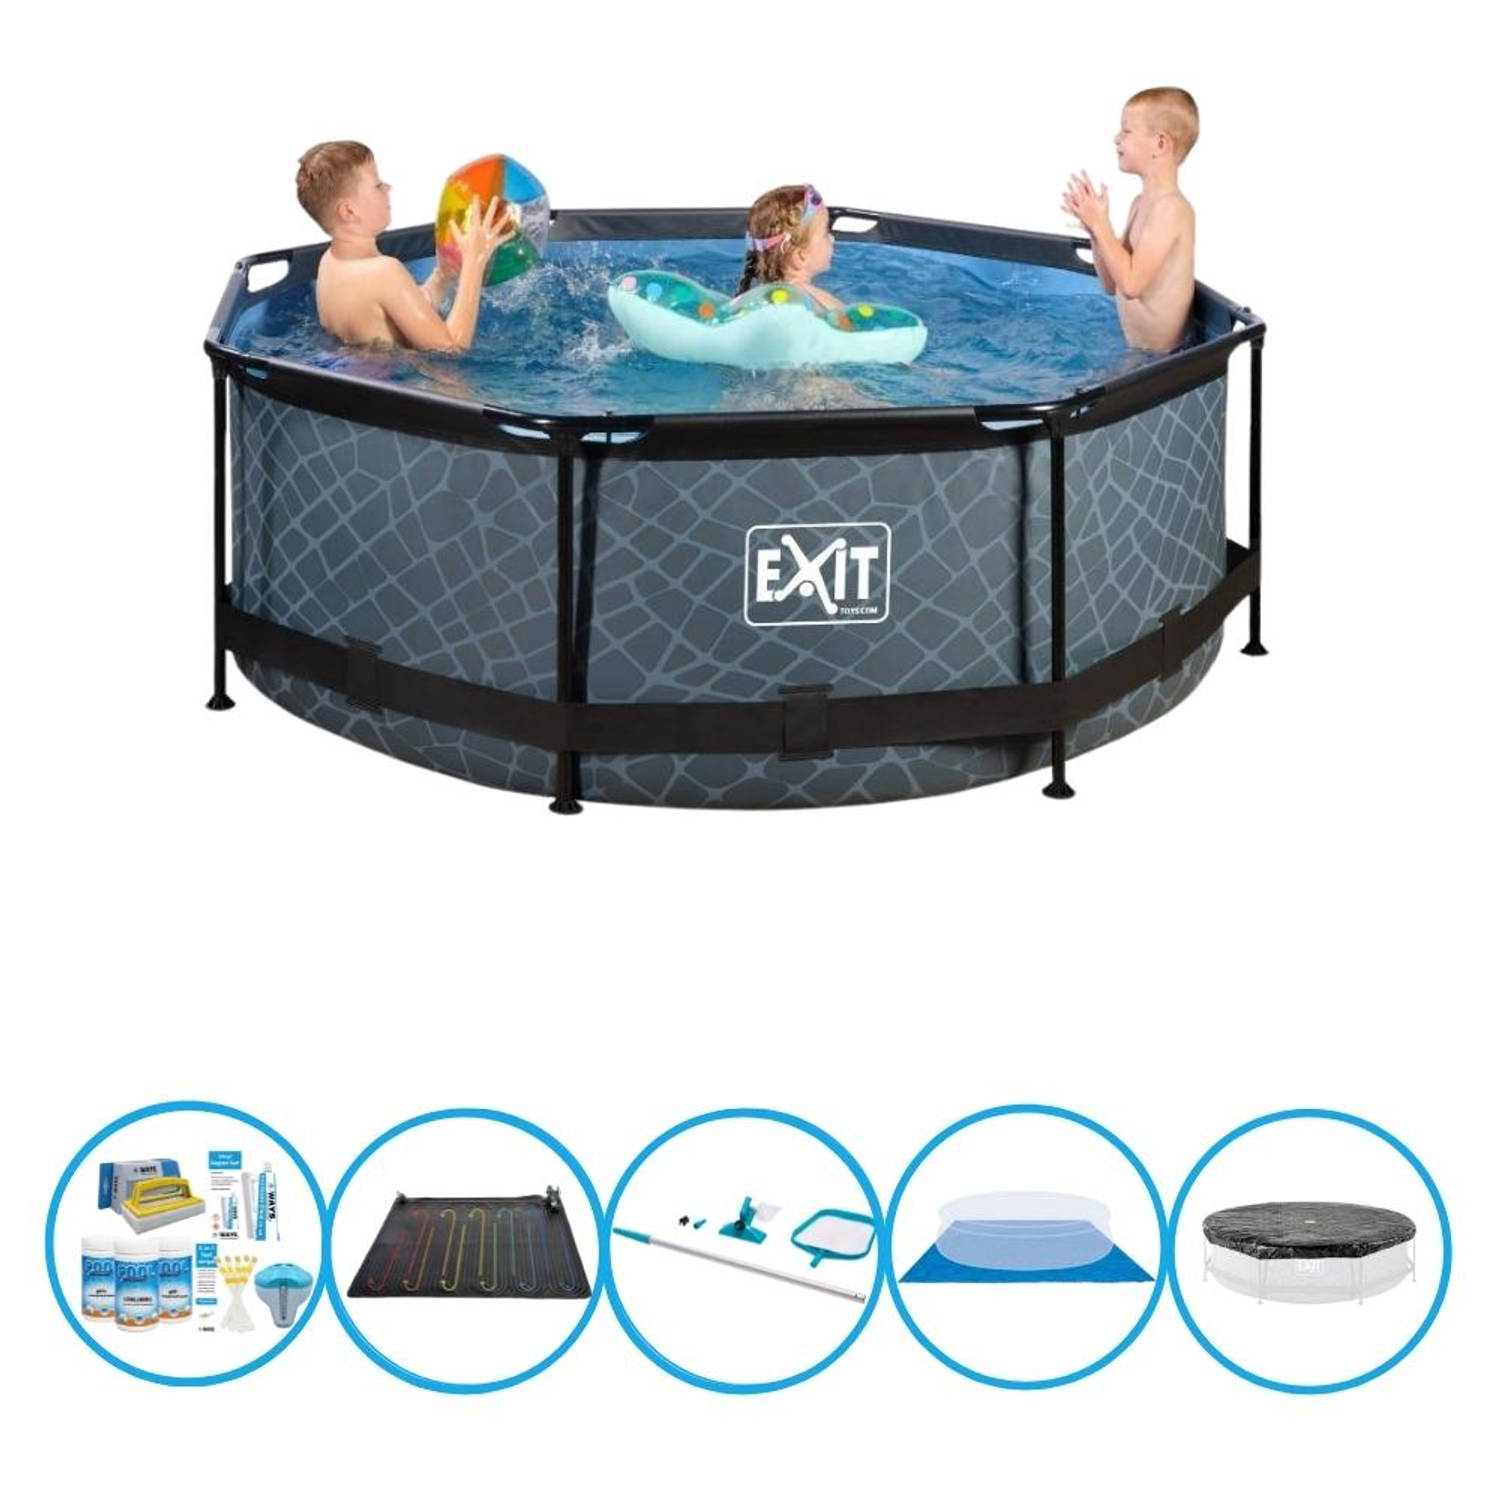 EXIT Zwembad Stone Grey - Frame Pool ø244x76cm - Inclusief accessoires